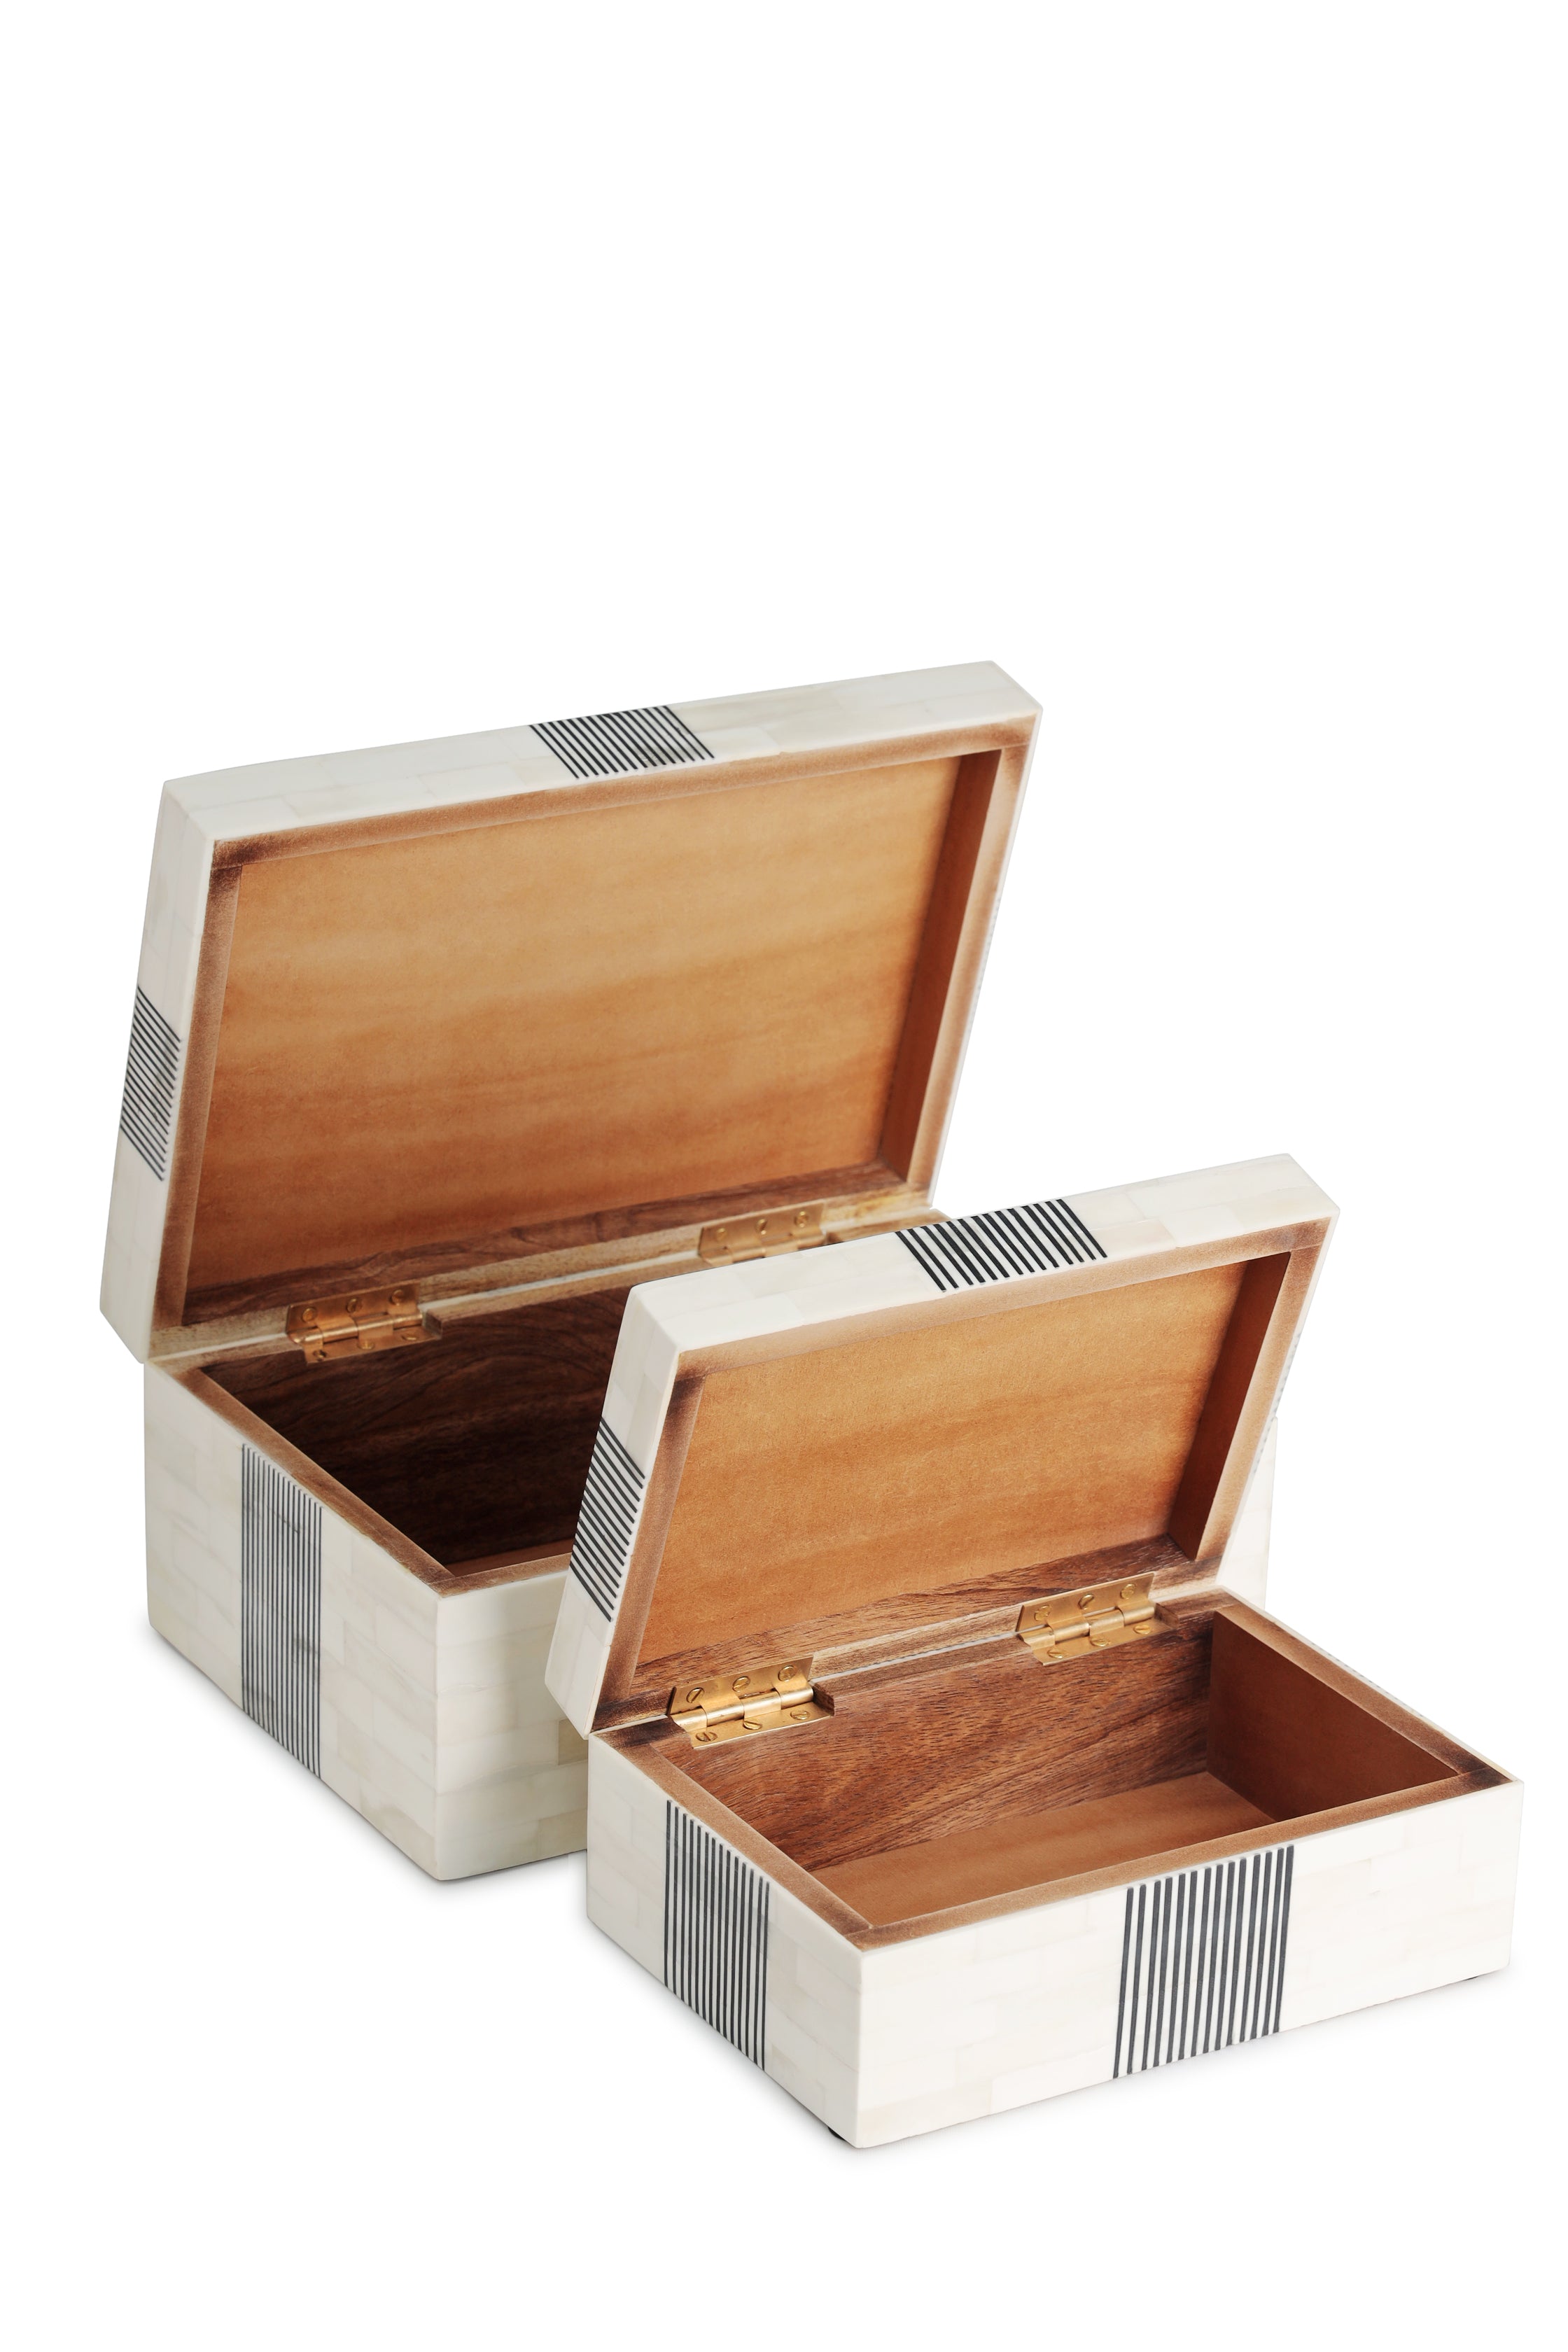 2 Piece Set Wooden Boxes with Hinged Lid, Wood Nesting Box